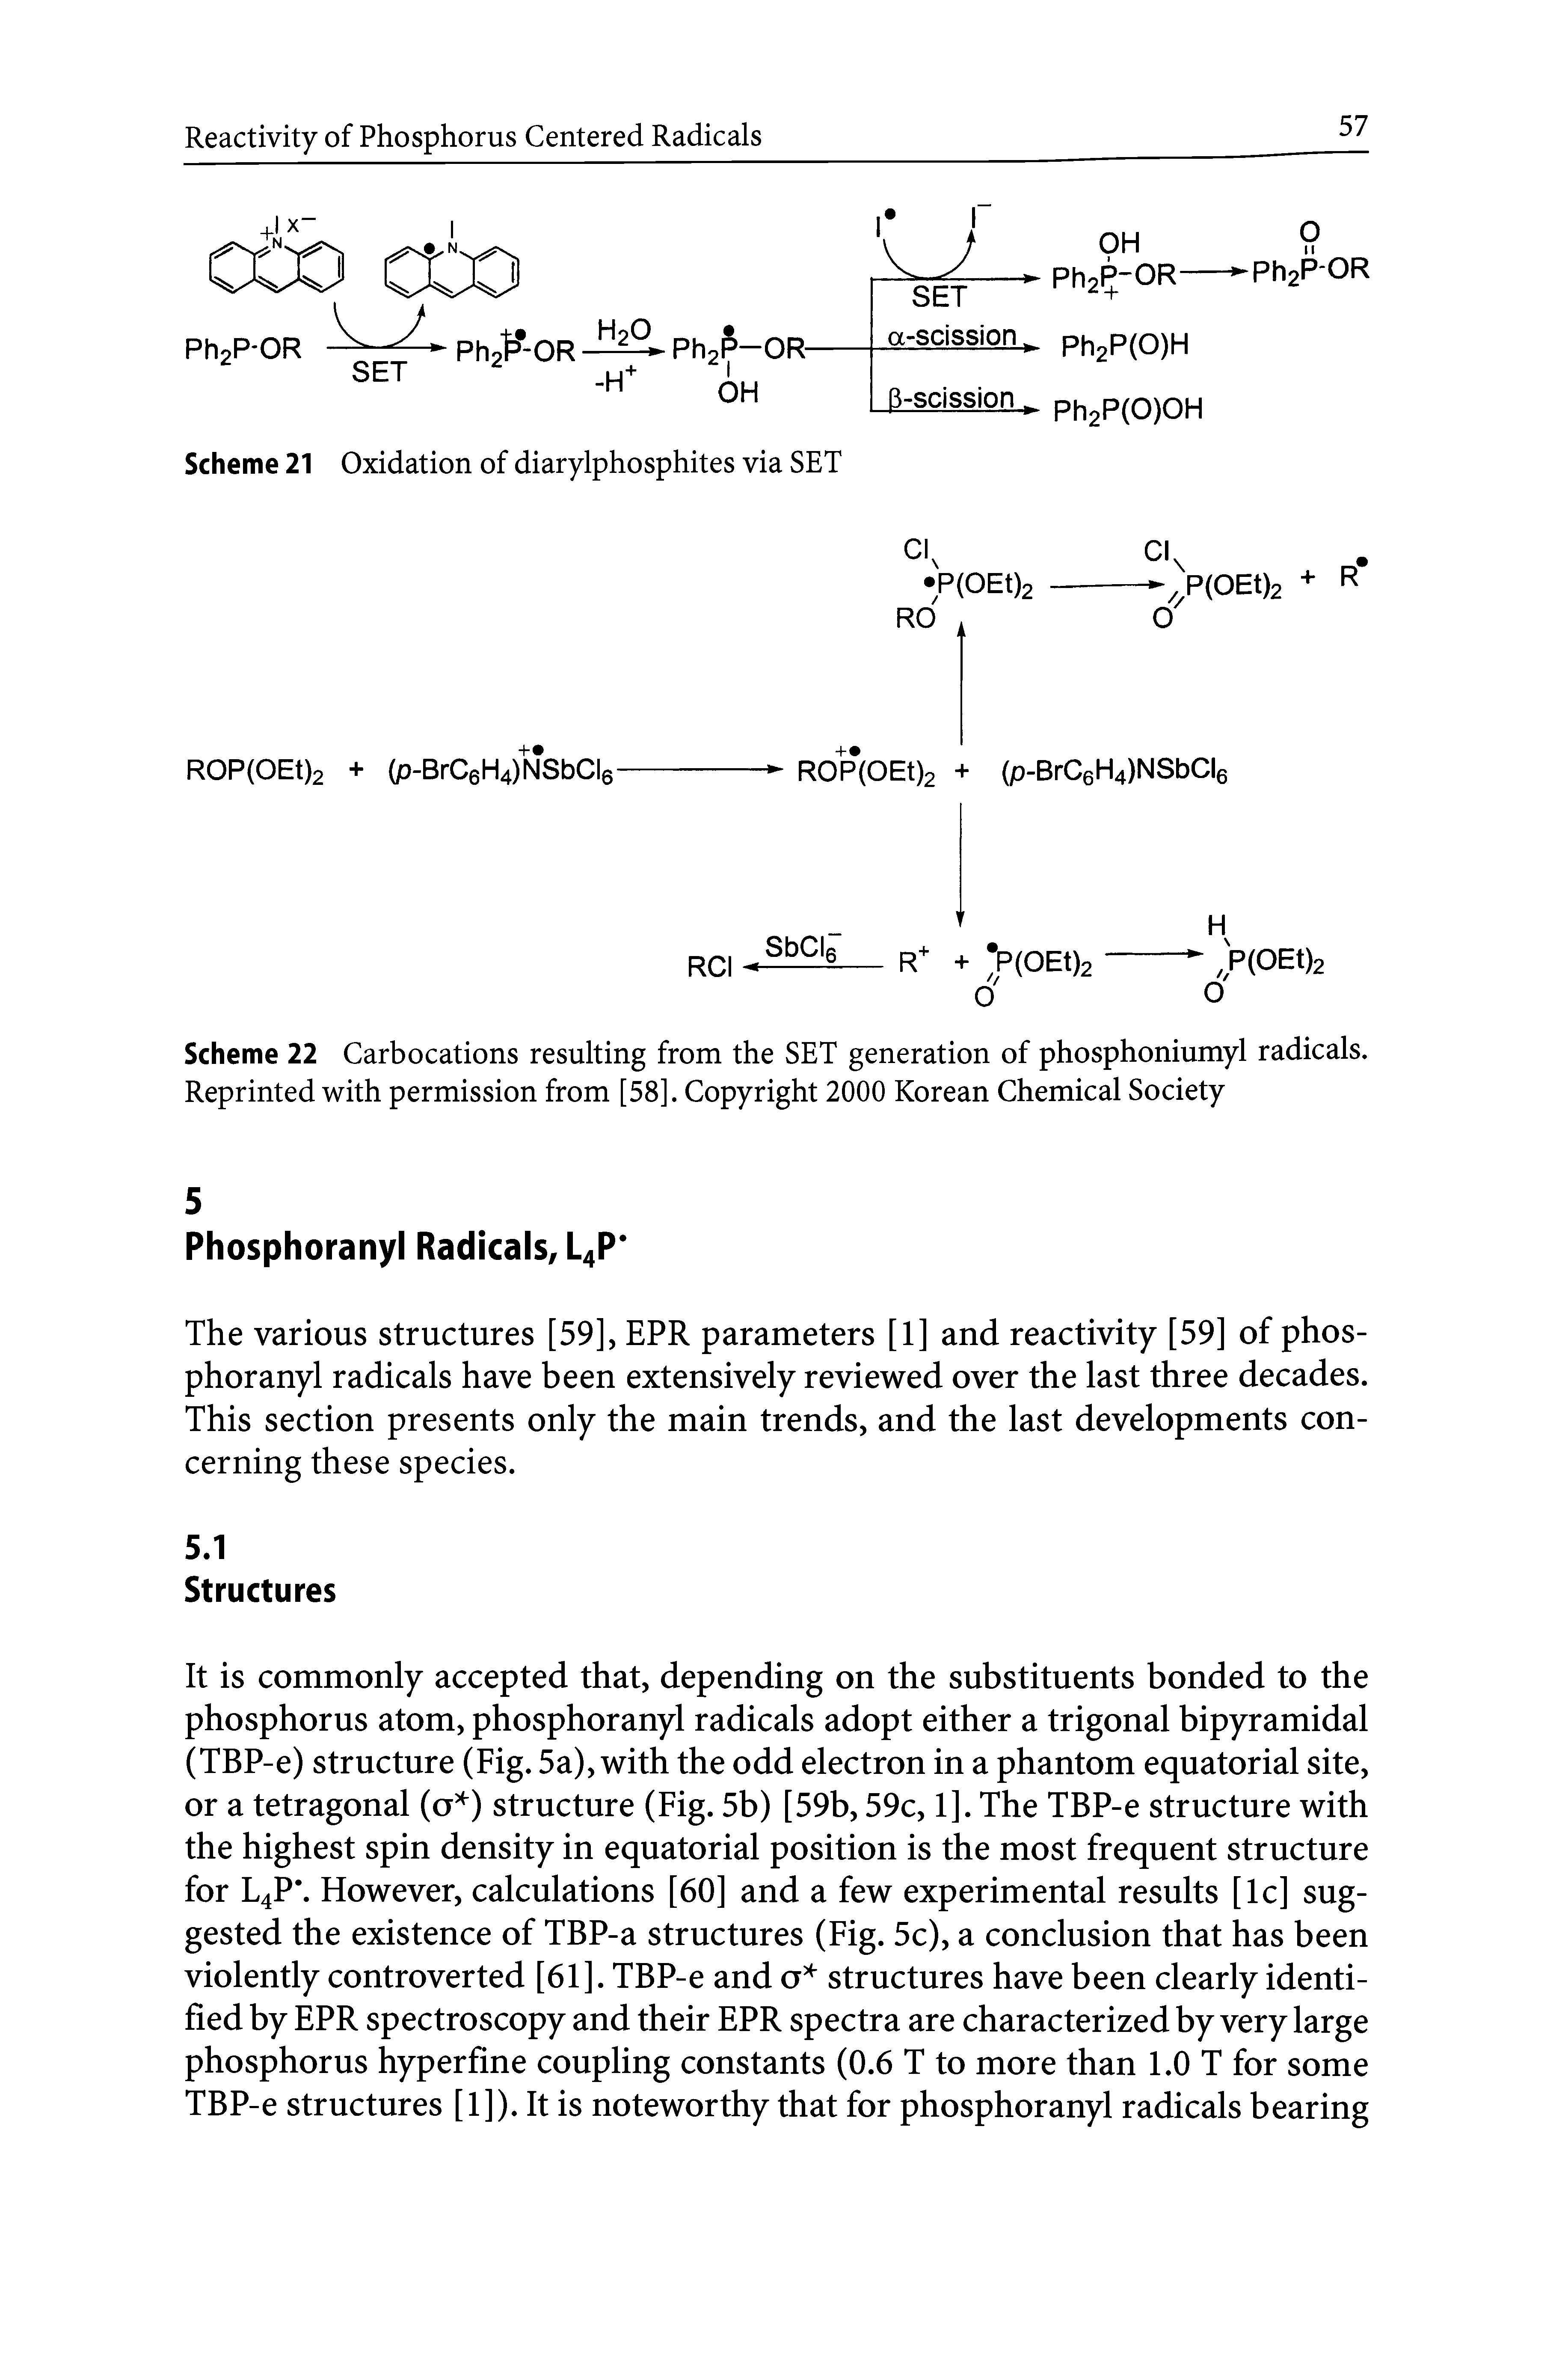 Scheme 22 Carbocations resulting from the SET generation of phosphoniumyl radicals. Reprinted with permission from [58]. Copyright 2000 Korean Chemical Society...